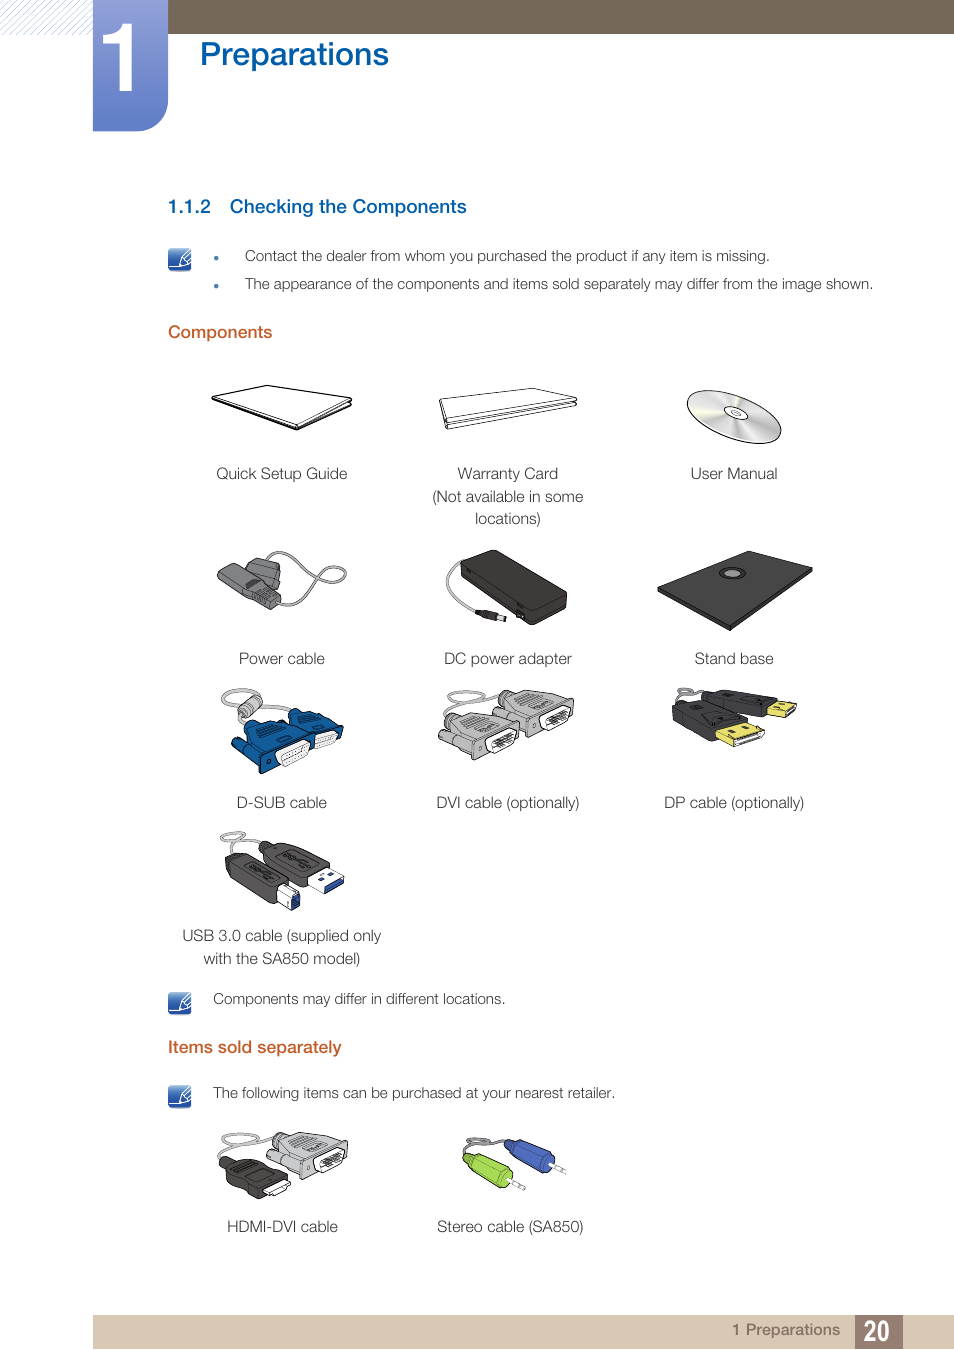 2 checking the components, Checking the components, Preparations | Samsung LS22A650DS-ZA User Manual | Page 20 / 96